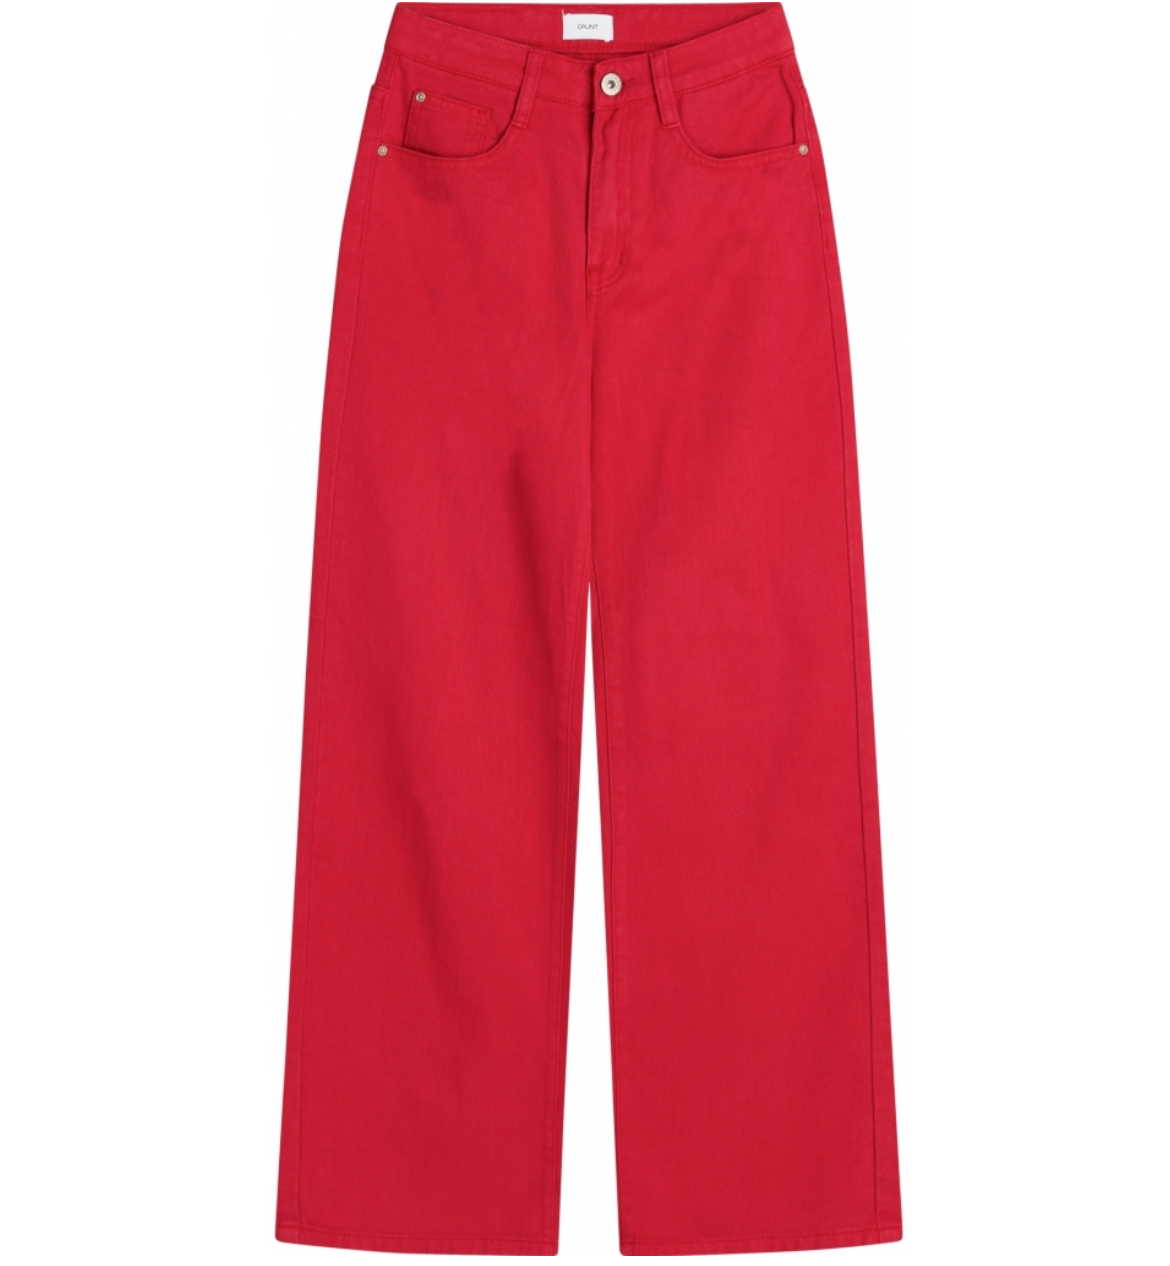 WIDE LEG RED JEANS - RED